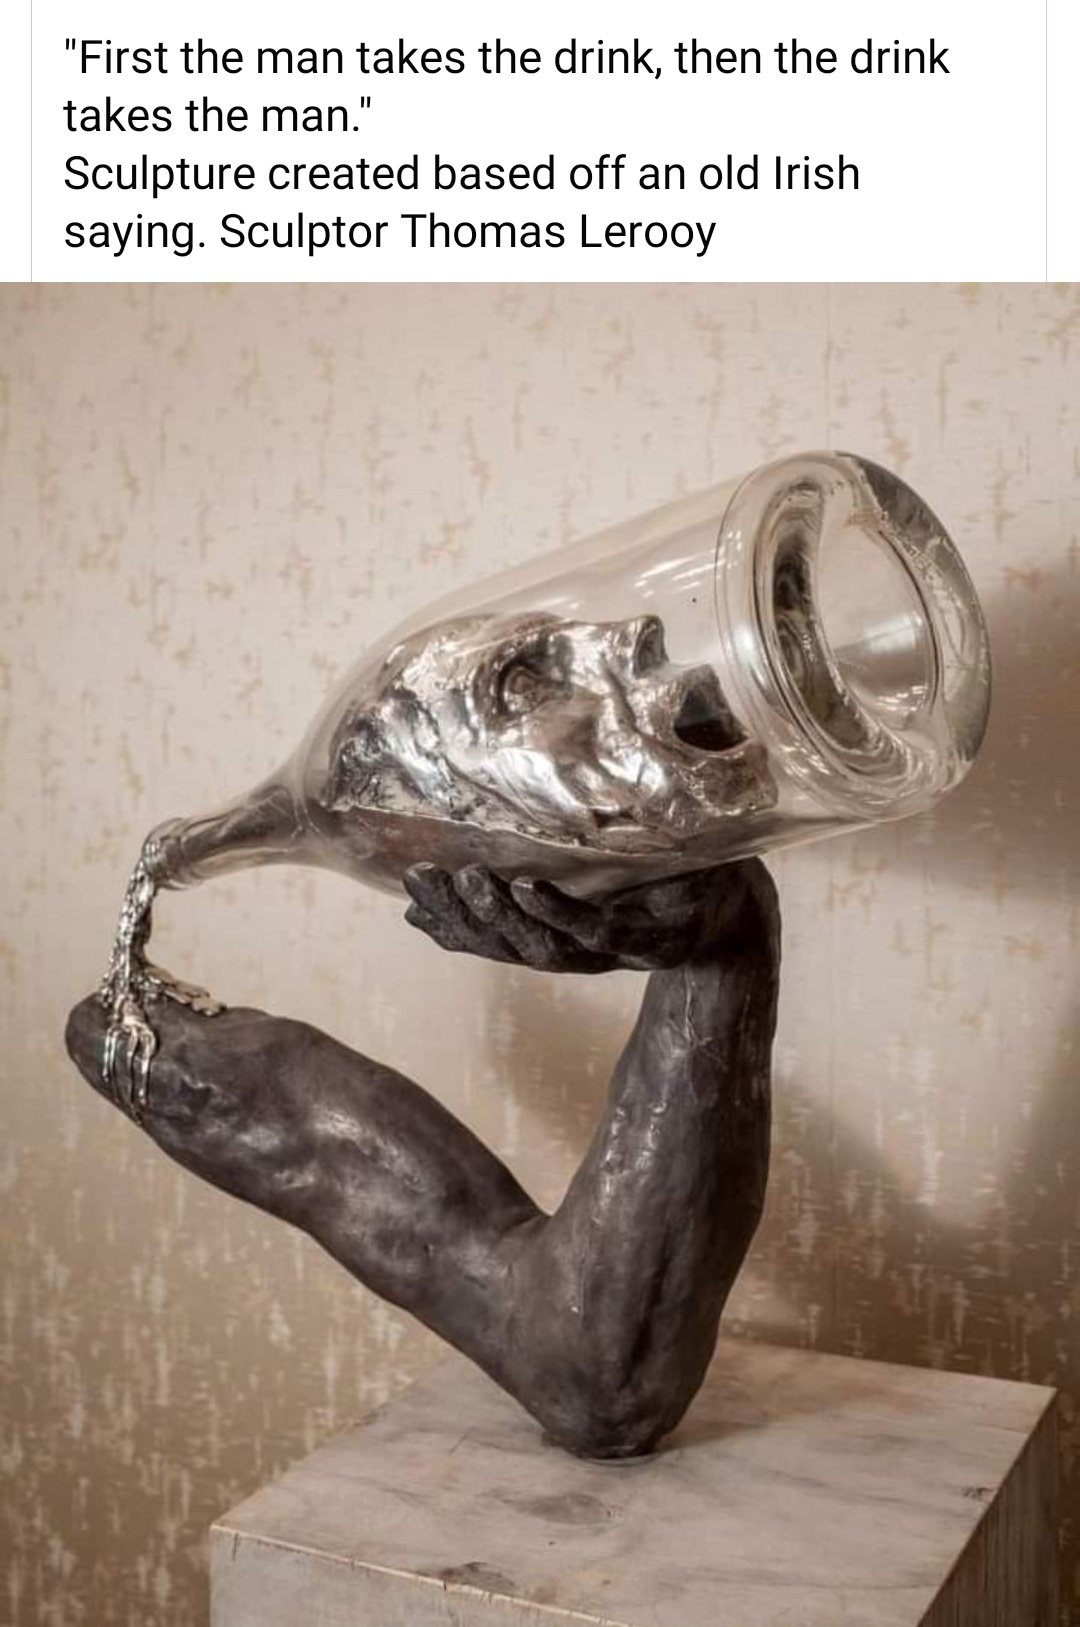 sculpture - "First the man takes the drink, then the drink takes the man." Sculpture created based off an old Irish saying. Sculptor Thomas Lerooy